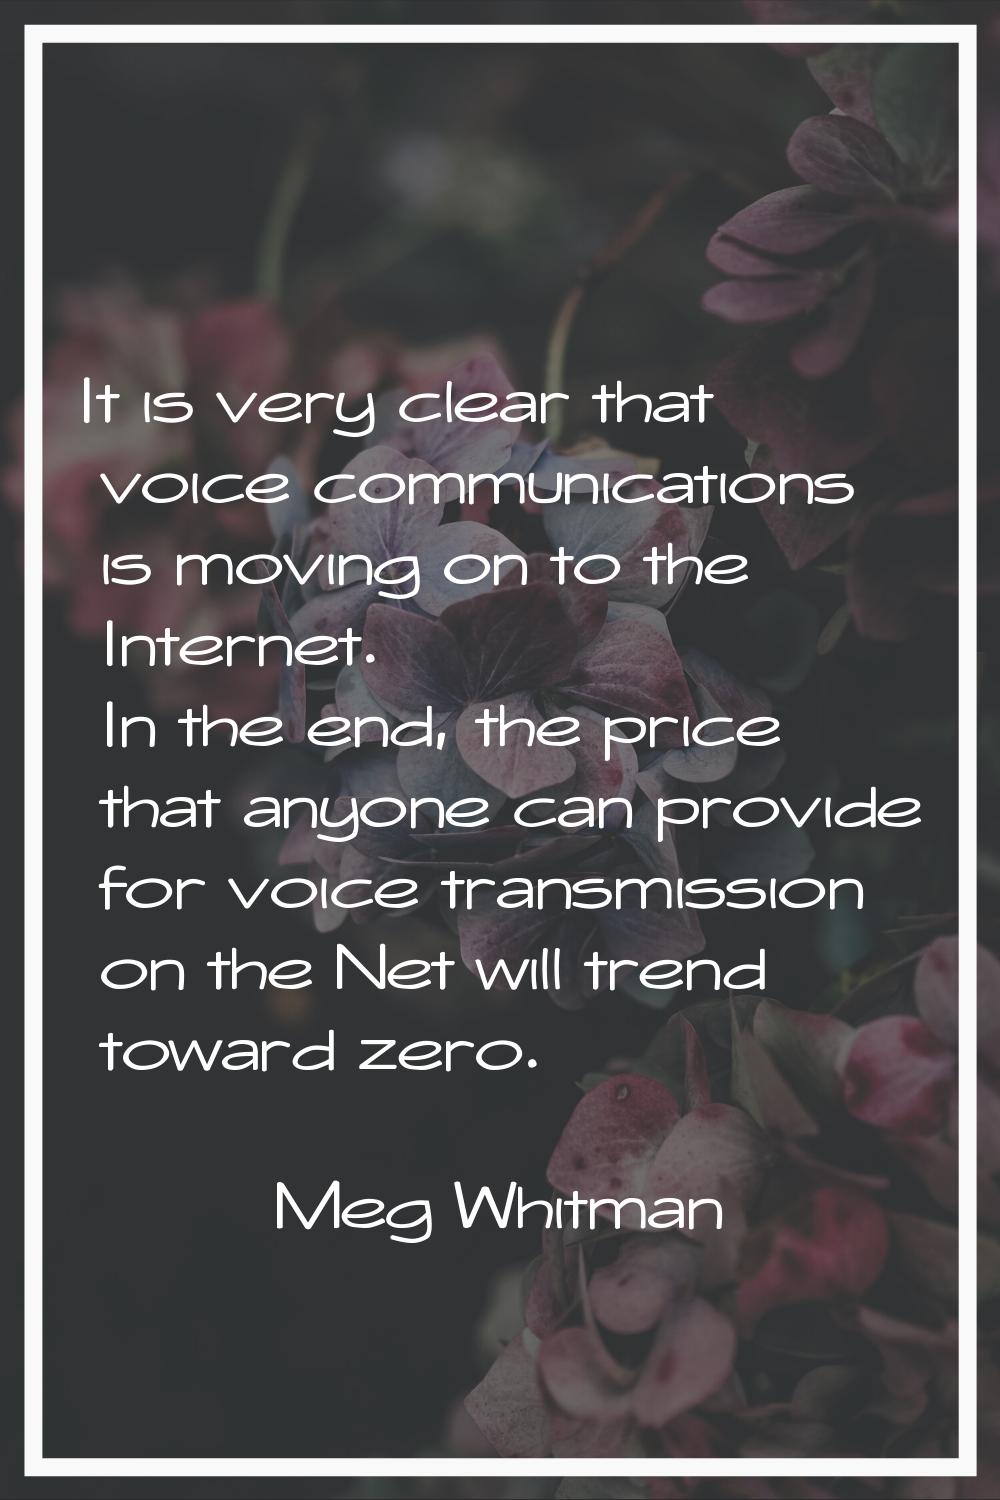 It is very clear that voice communications is moving on to the Internet. In the end, the price that